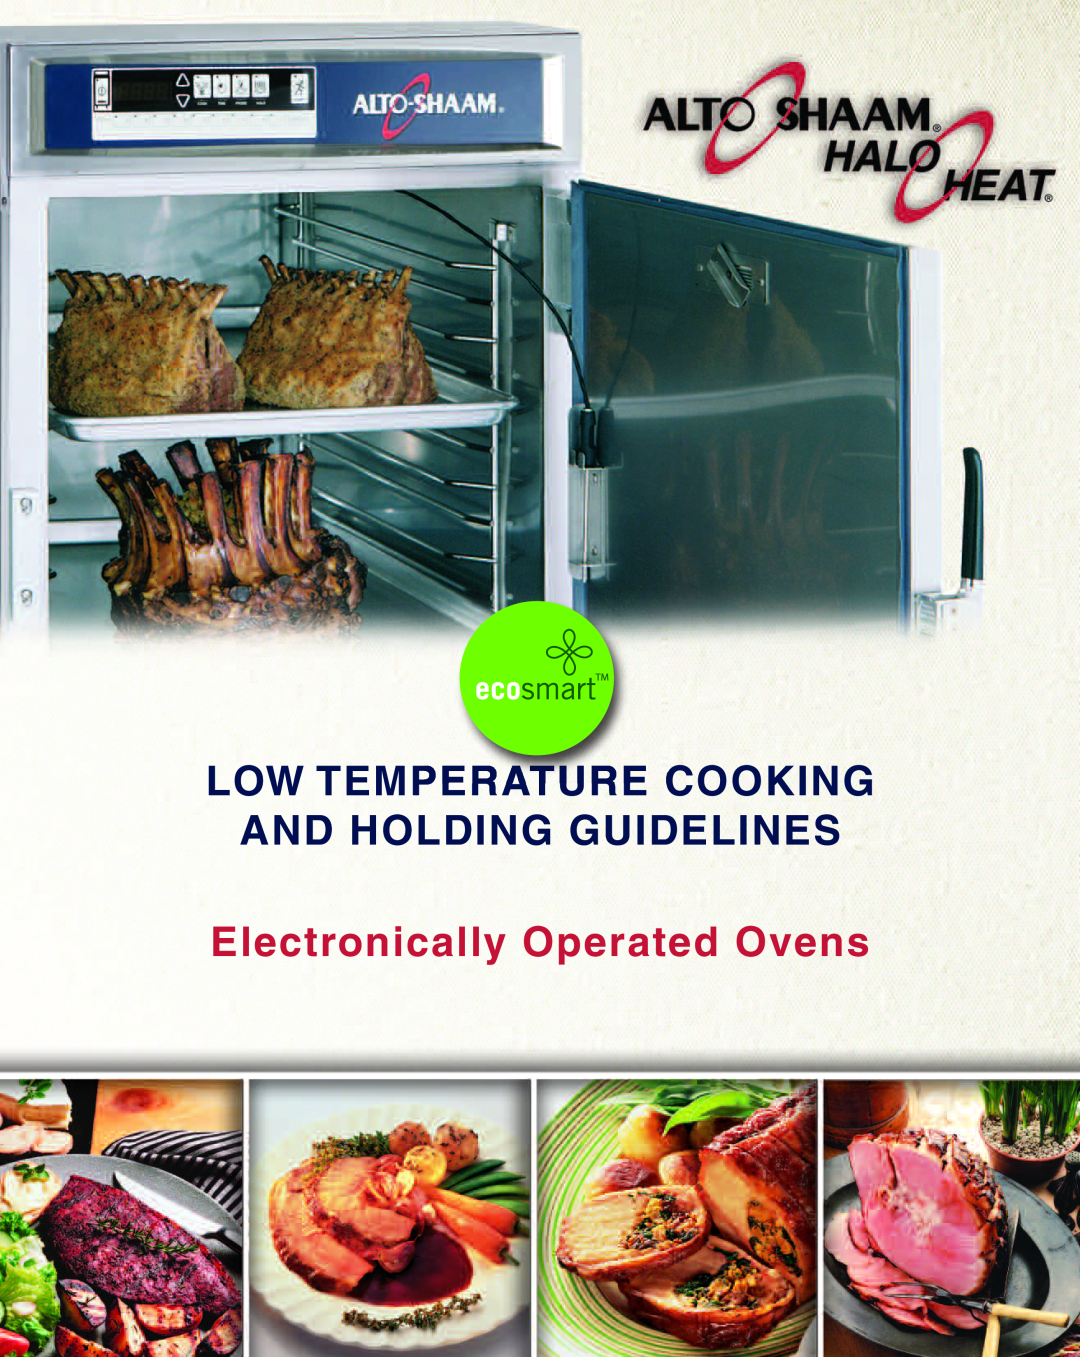 Alto-Shaam Electronically Operated Ovens manual Low Temperature Cooki Ng And Holding Gui Delines 